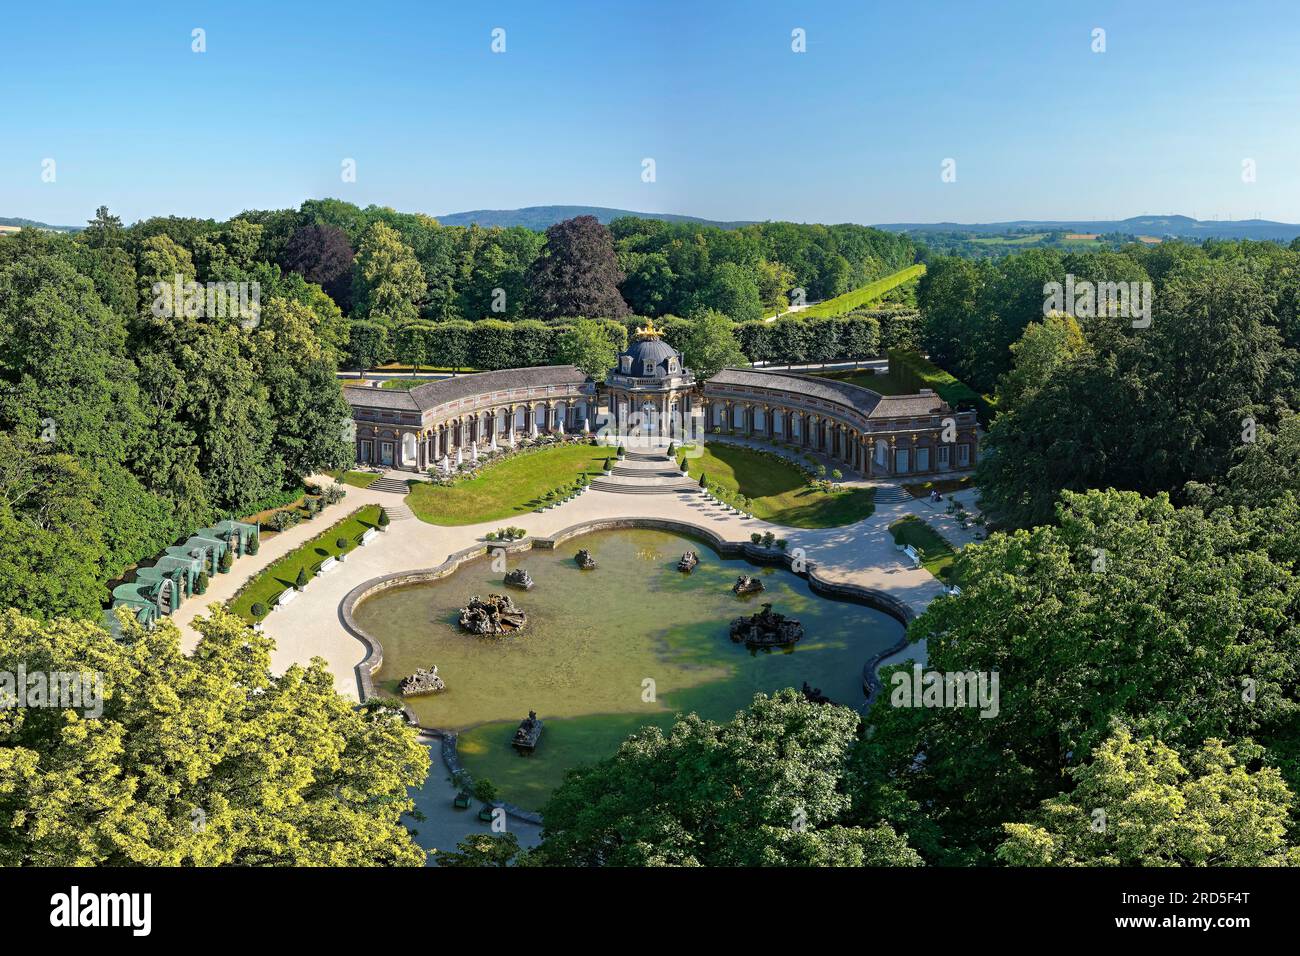 New Palace, orangery with central sun temple, circular buildings on both sides with arcade tract and golden quadriga on the roof, water basin in Stock Photo